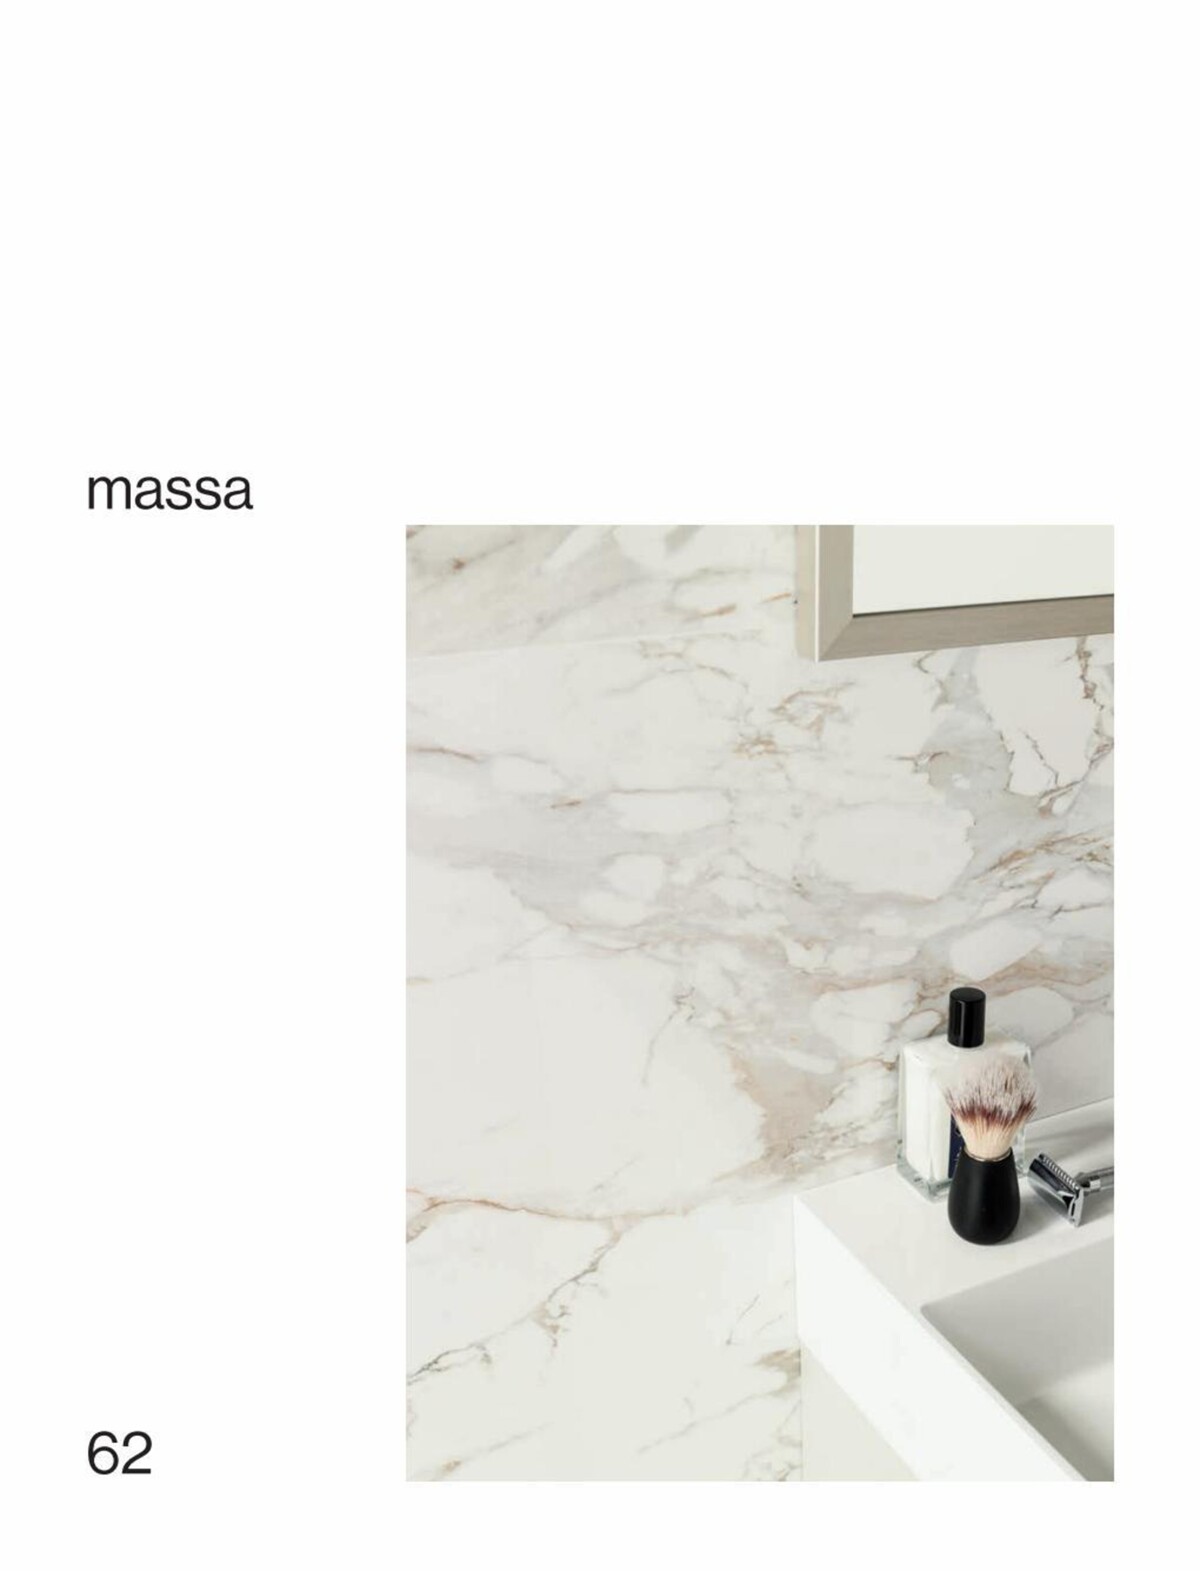 Catalogue MARMI,a ceramic tile that echoes the purity of marble, page 00062